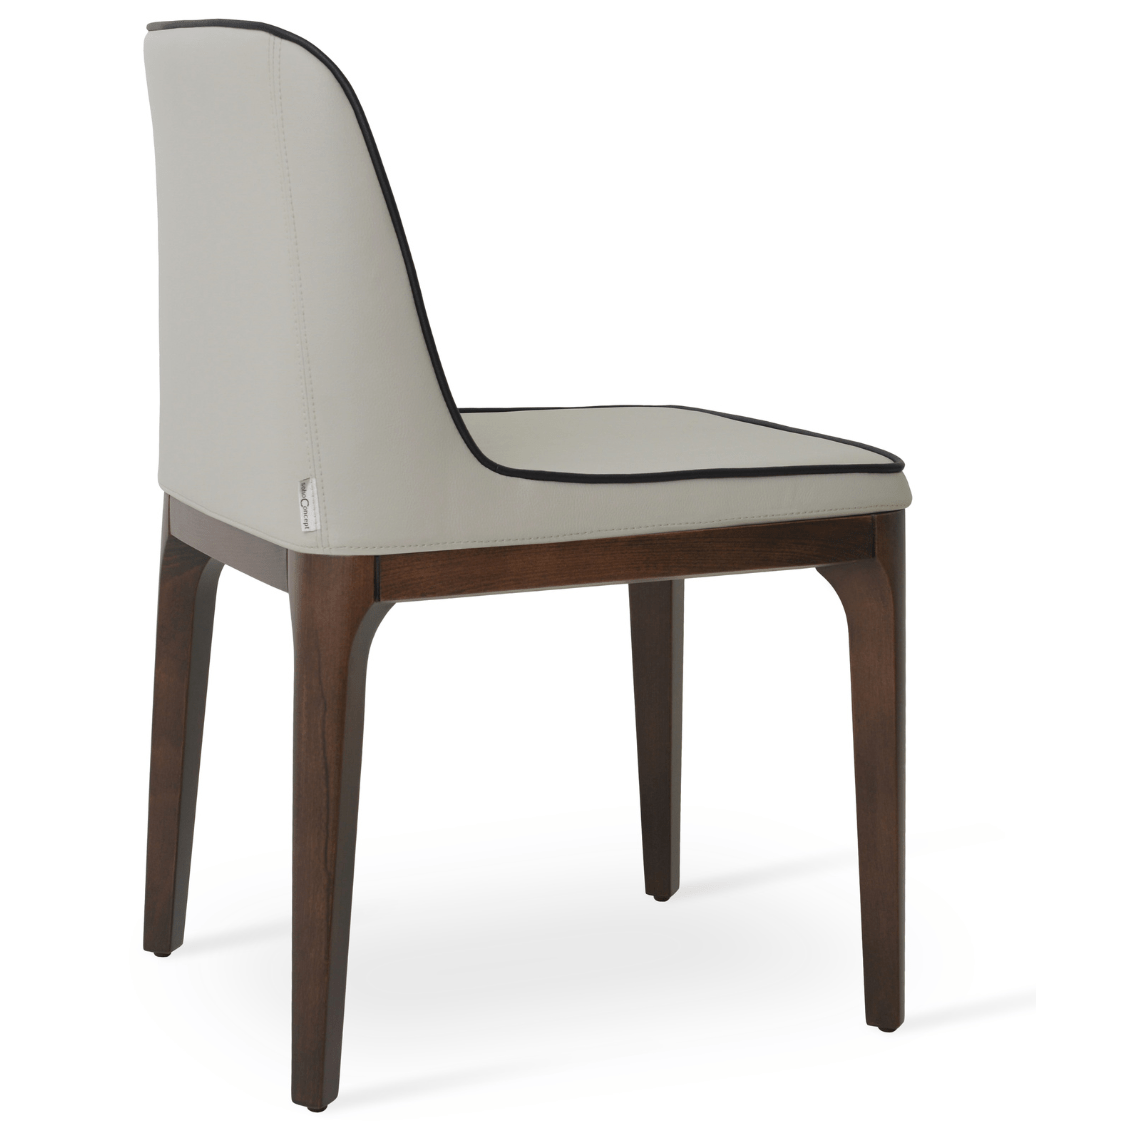 London Cream Leather Dining Chairs - Your Bar Stools Canada